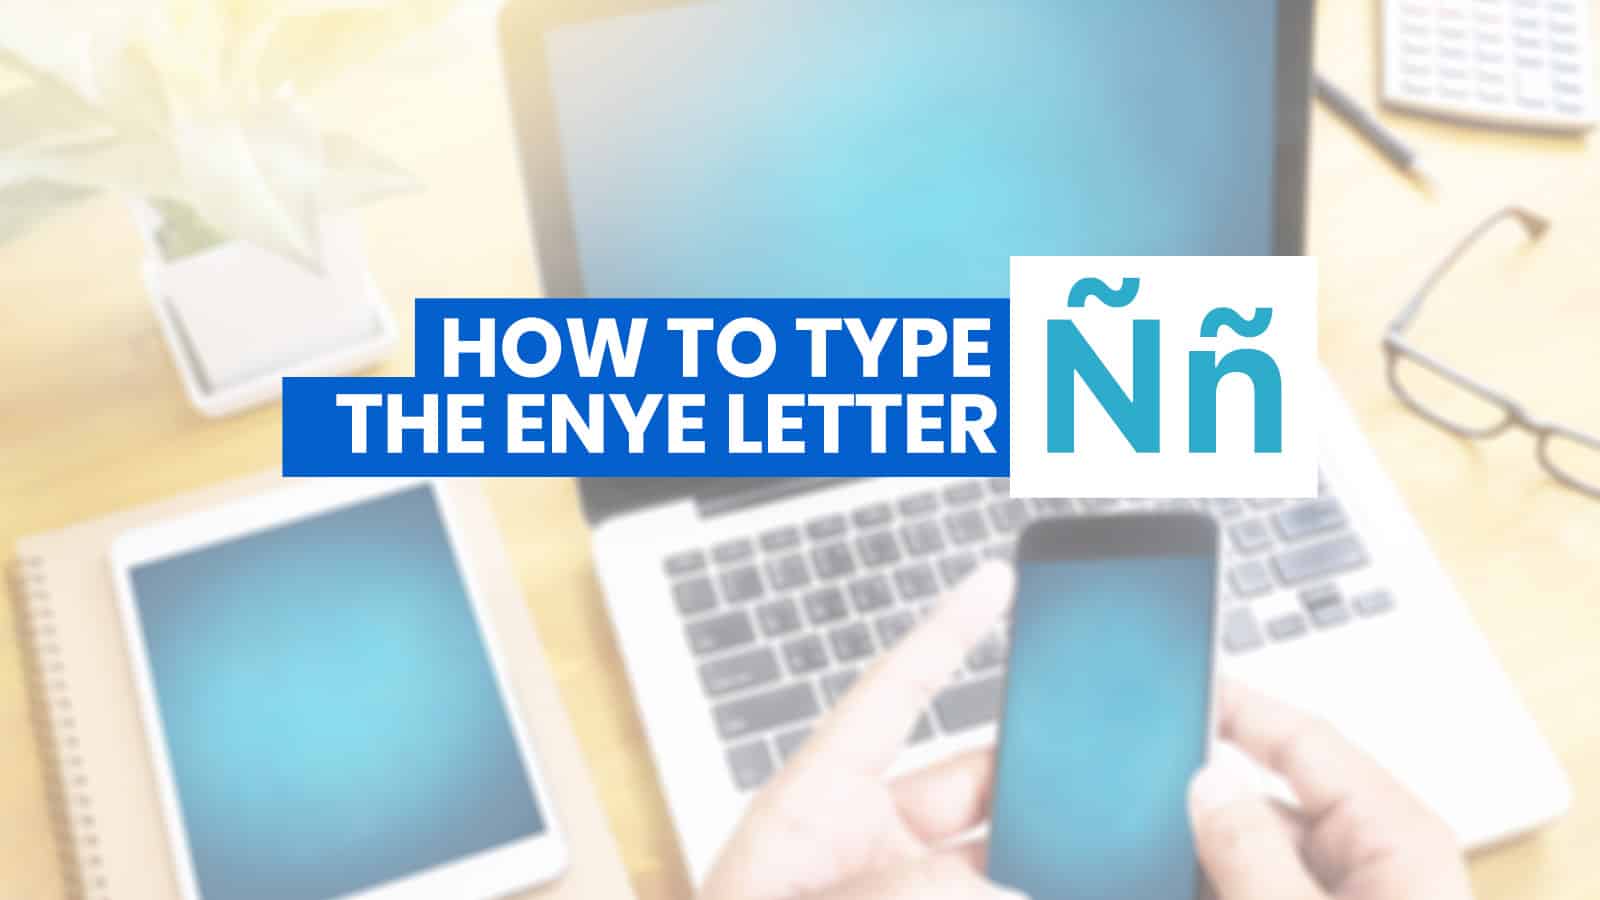 HOW TO TYPE ENYE LETTER (Ññ) on iPhone, Android, Word & Computer (with Keyboard Shortcuts)